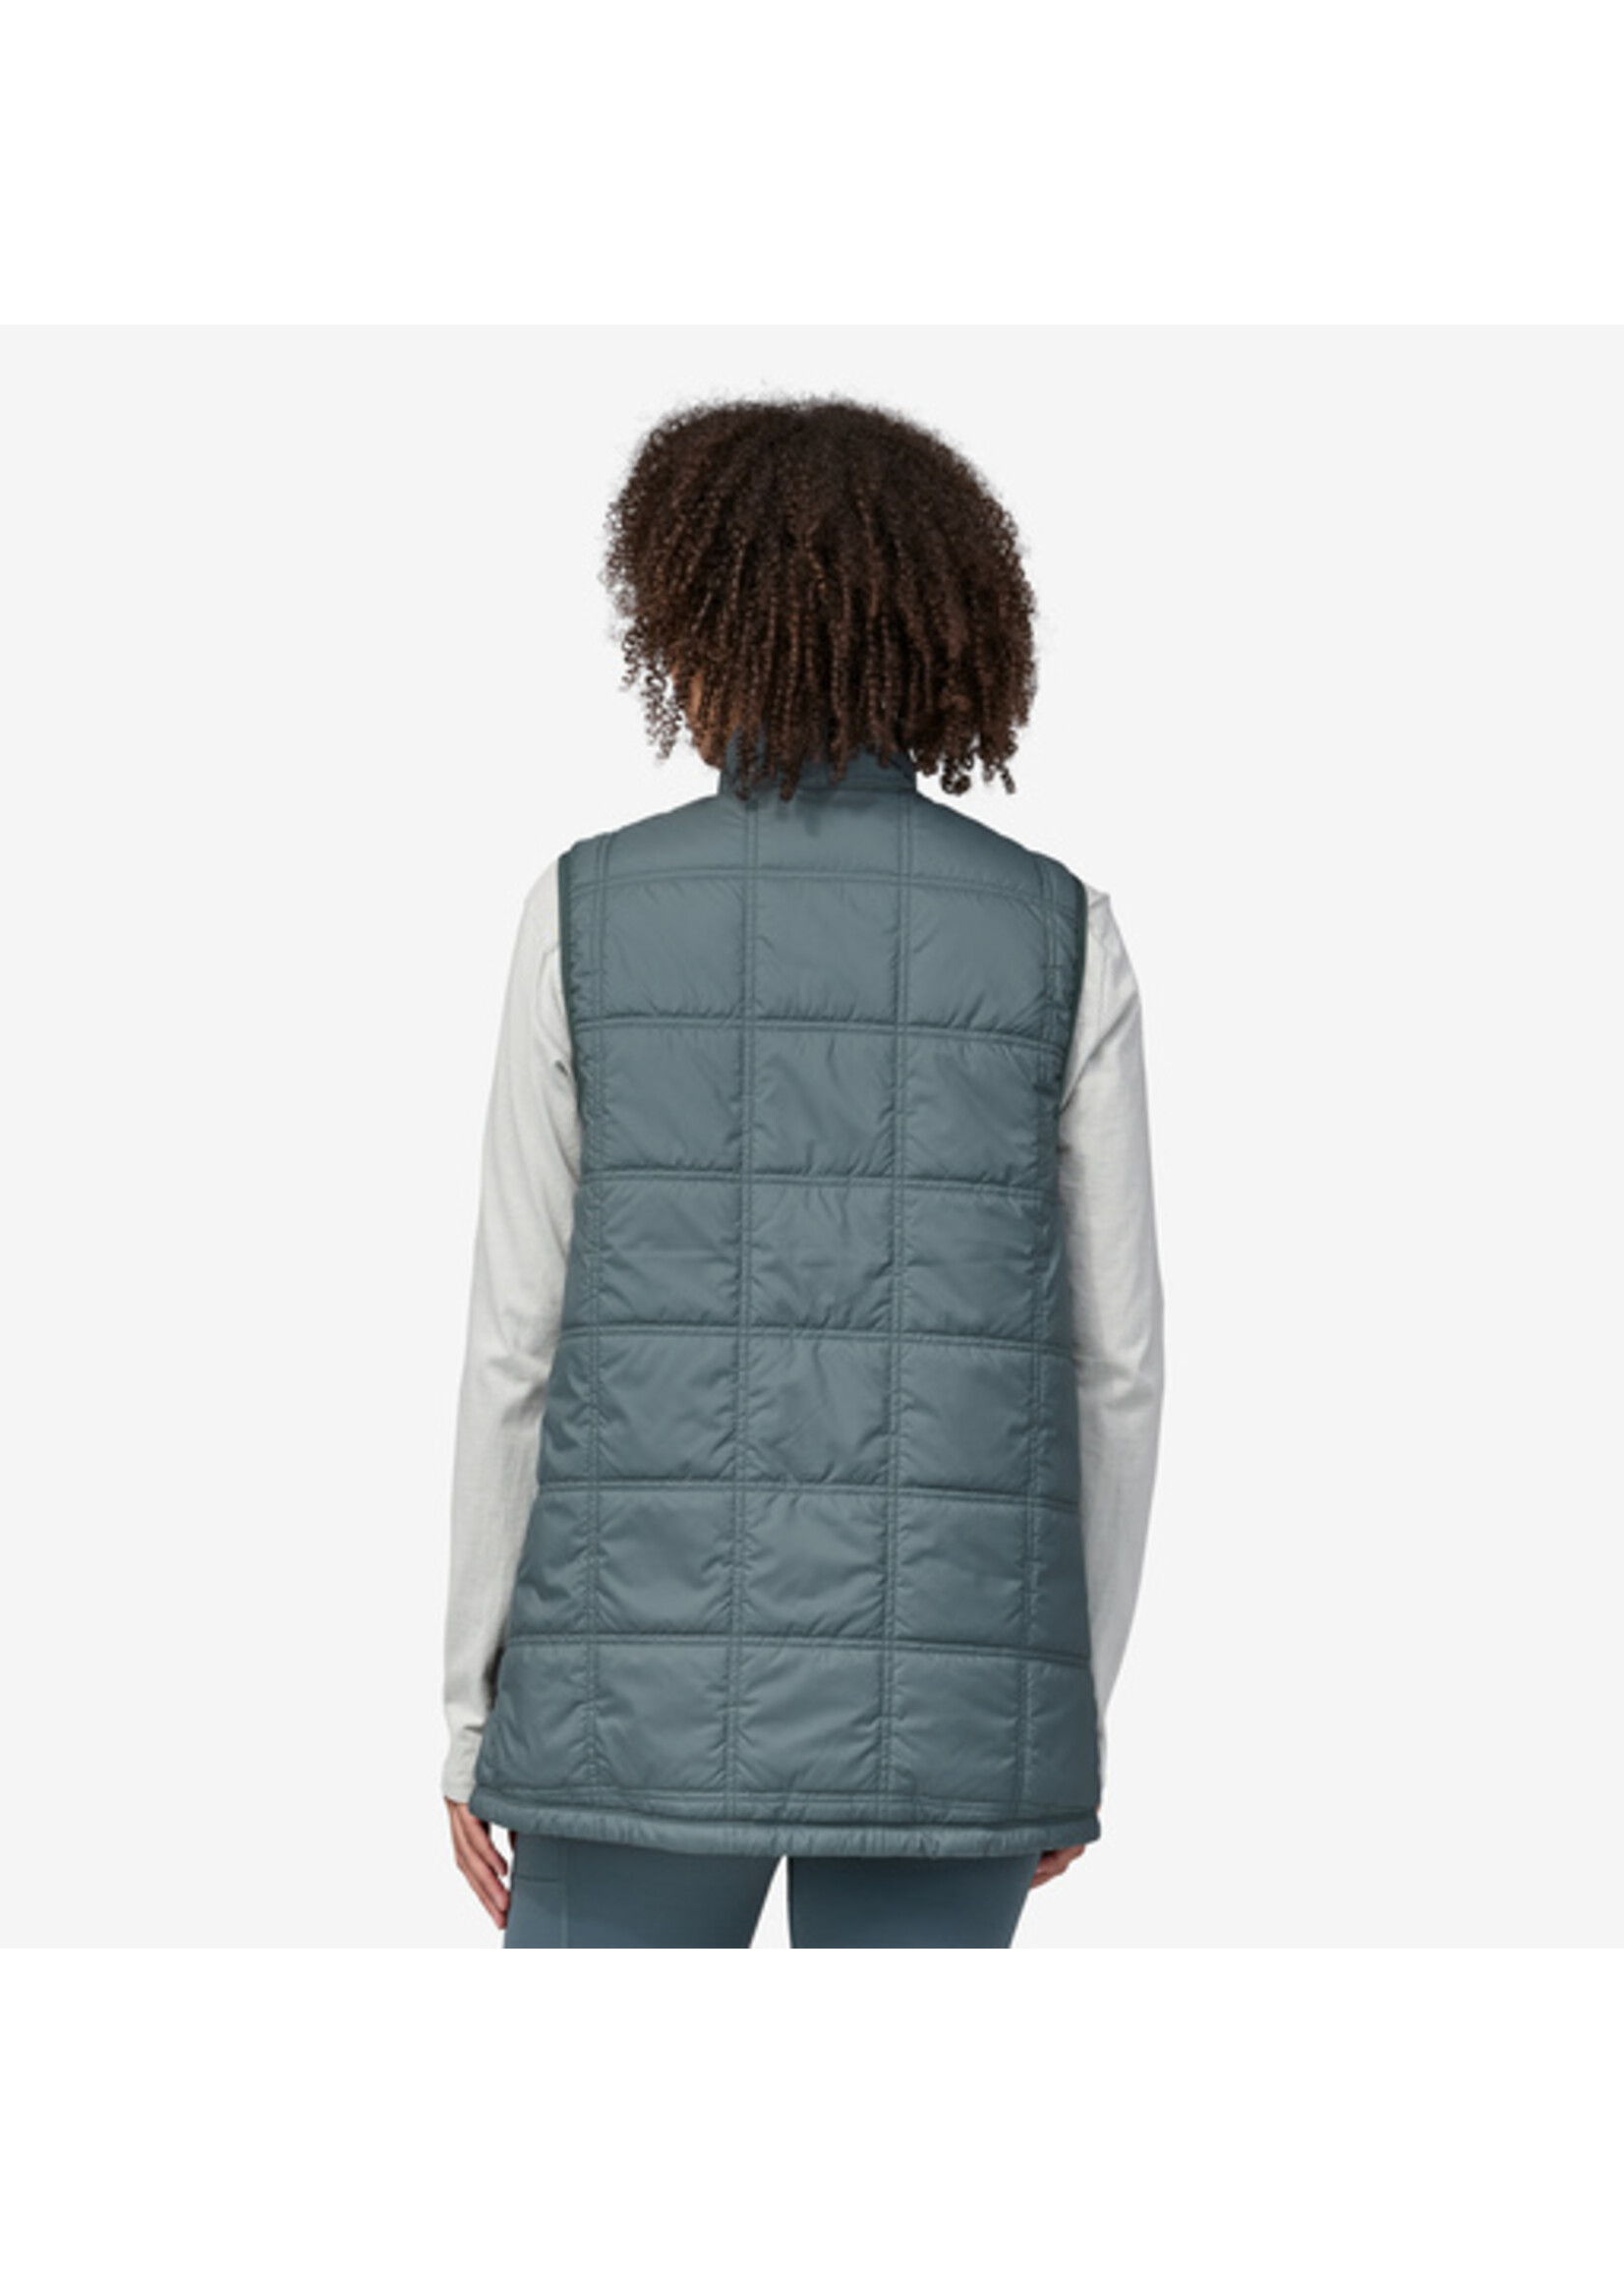 Patagonia Patagonia W's Lost Canyon Vest